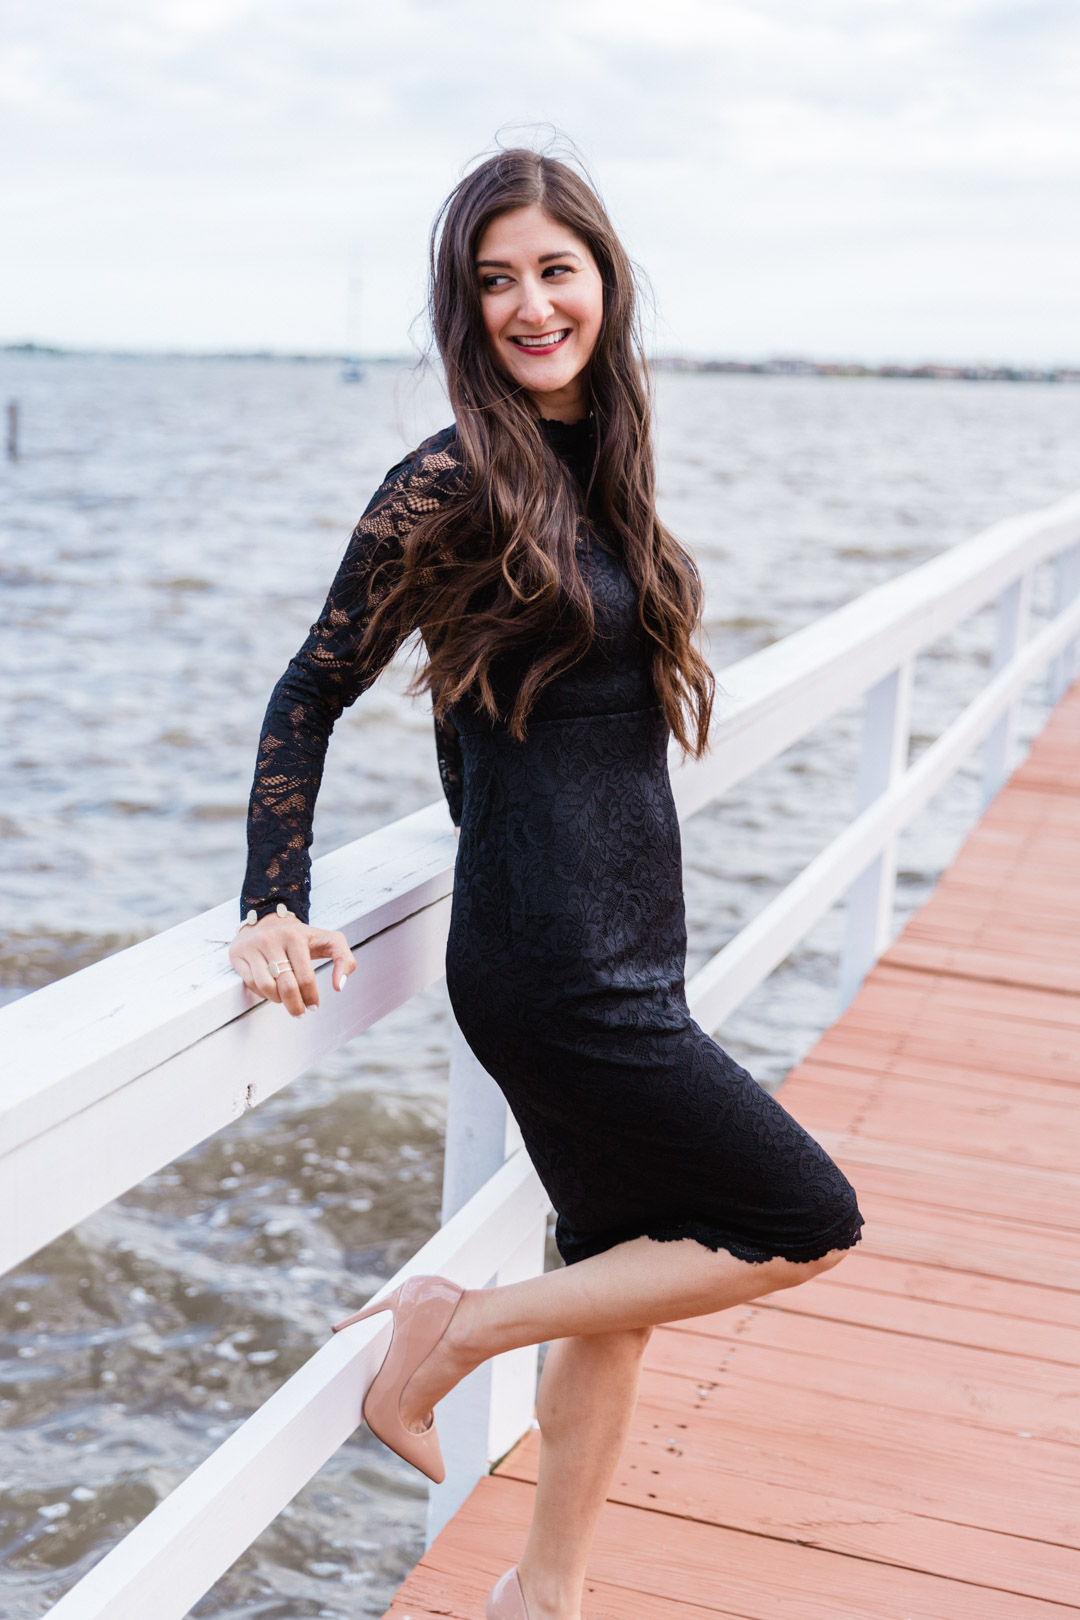 Black dress perfect for fall weddings or date night. | The Fashionable Maven